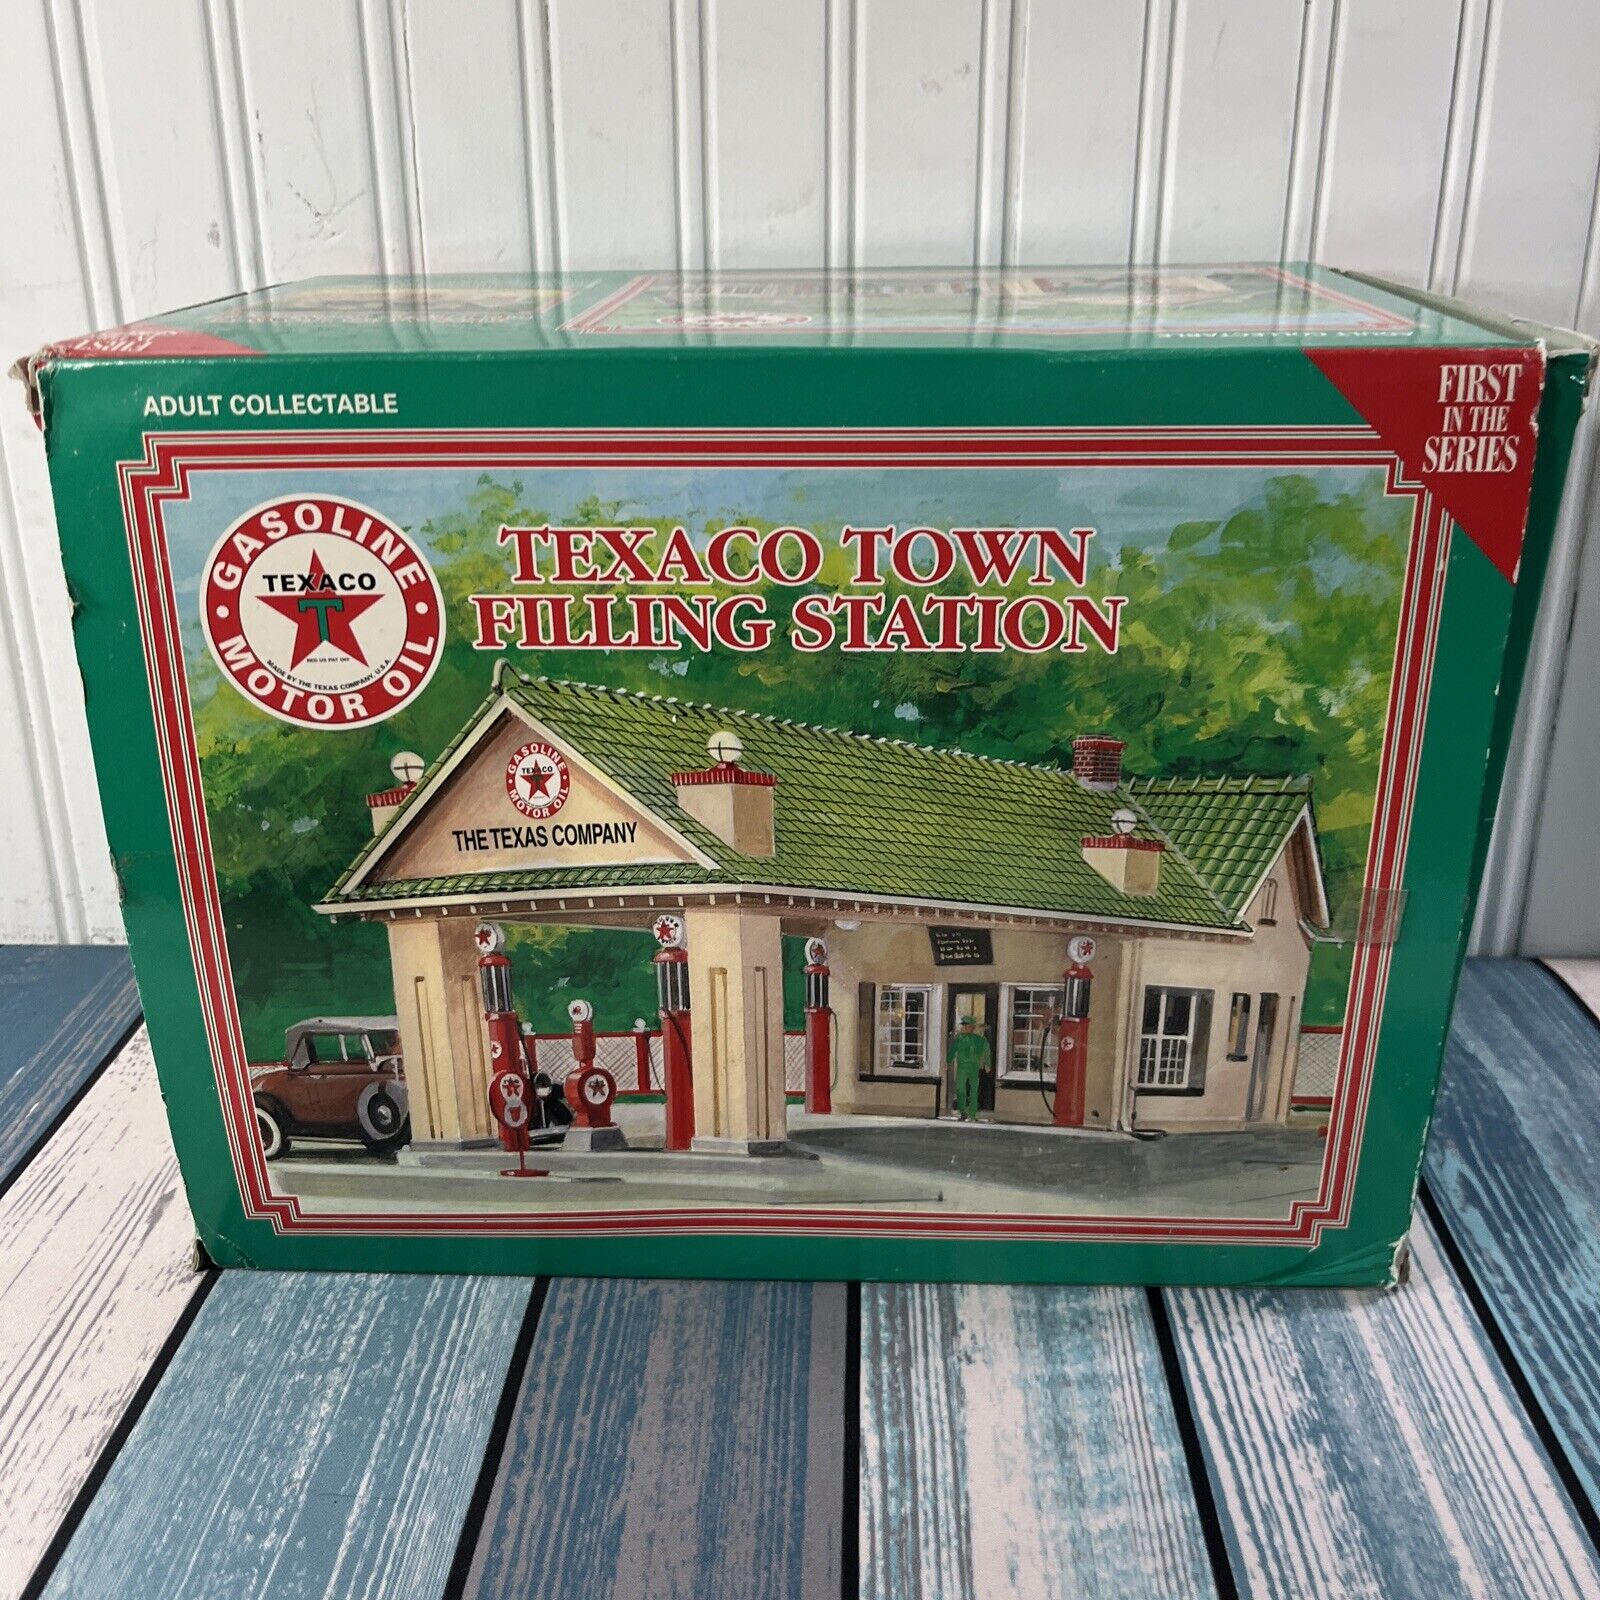 NEW 1995 TEXACO TOWN FILLING STATION FIRST IN SERIES PORCELAIN LIGHTED STATION 